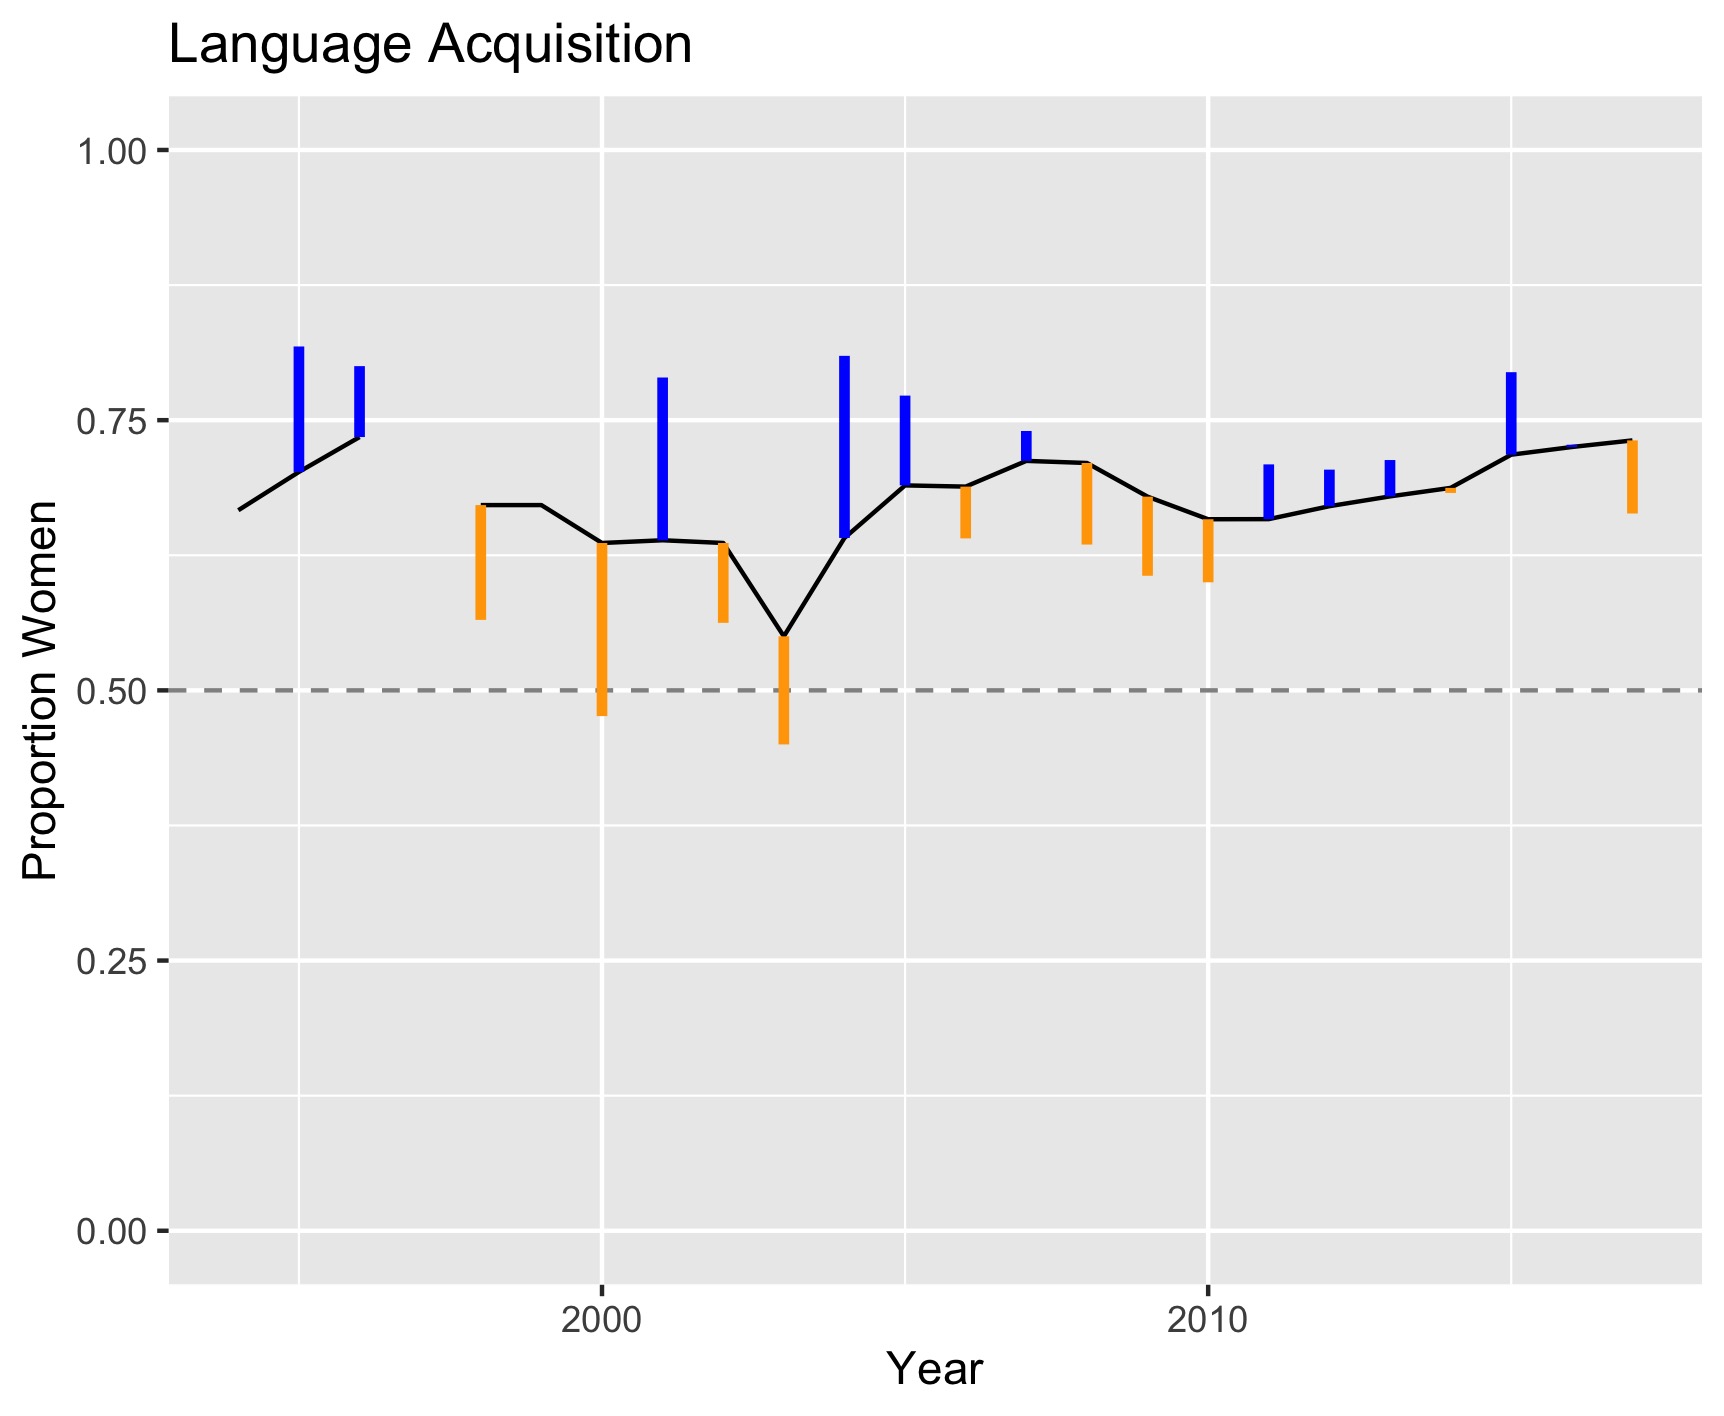 Publishing rates across time, relative to an estimate of representation in the field, in the field of language acquisition